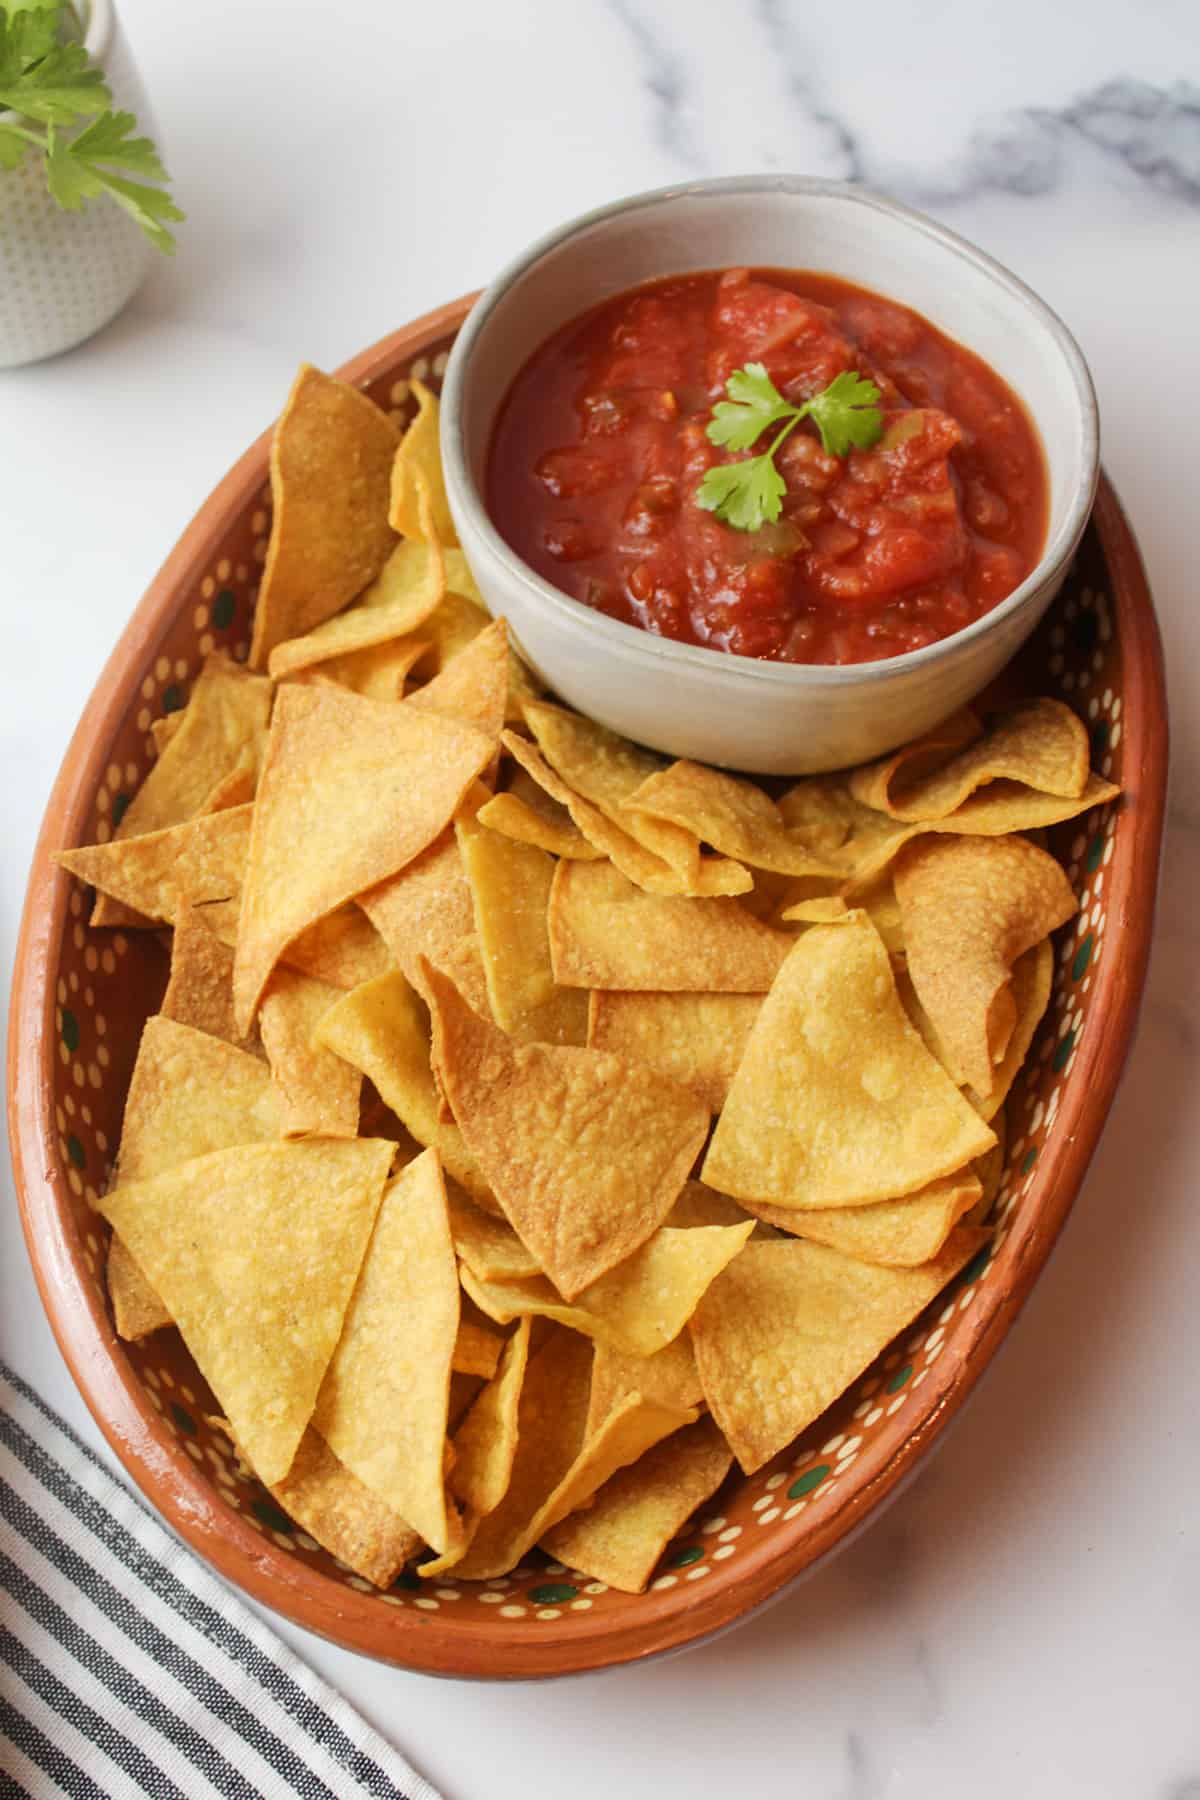 a plate of homemade tortilla chips and a bowl of red salsa